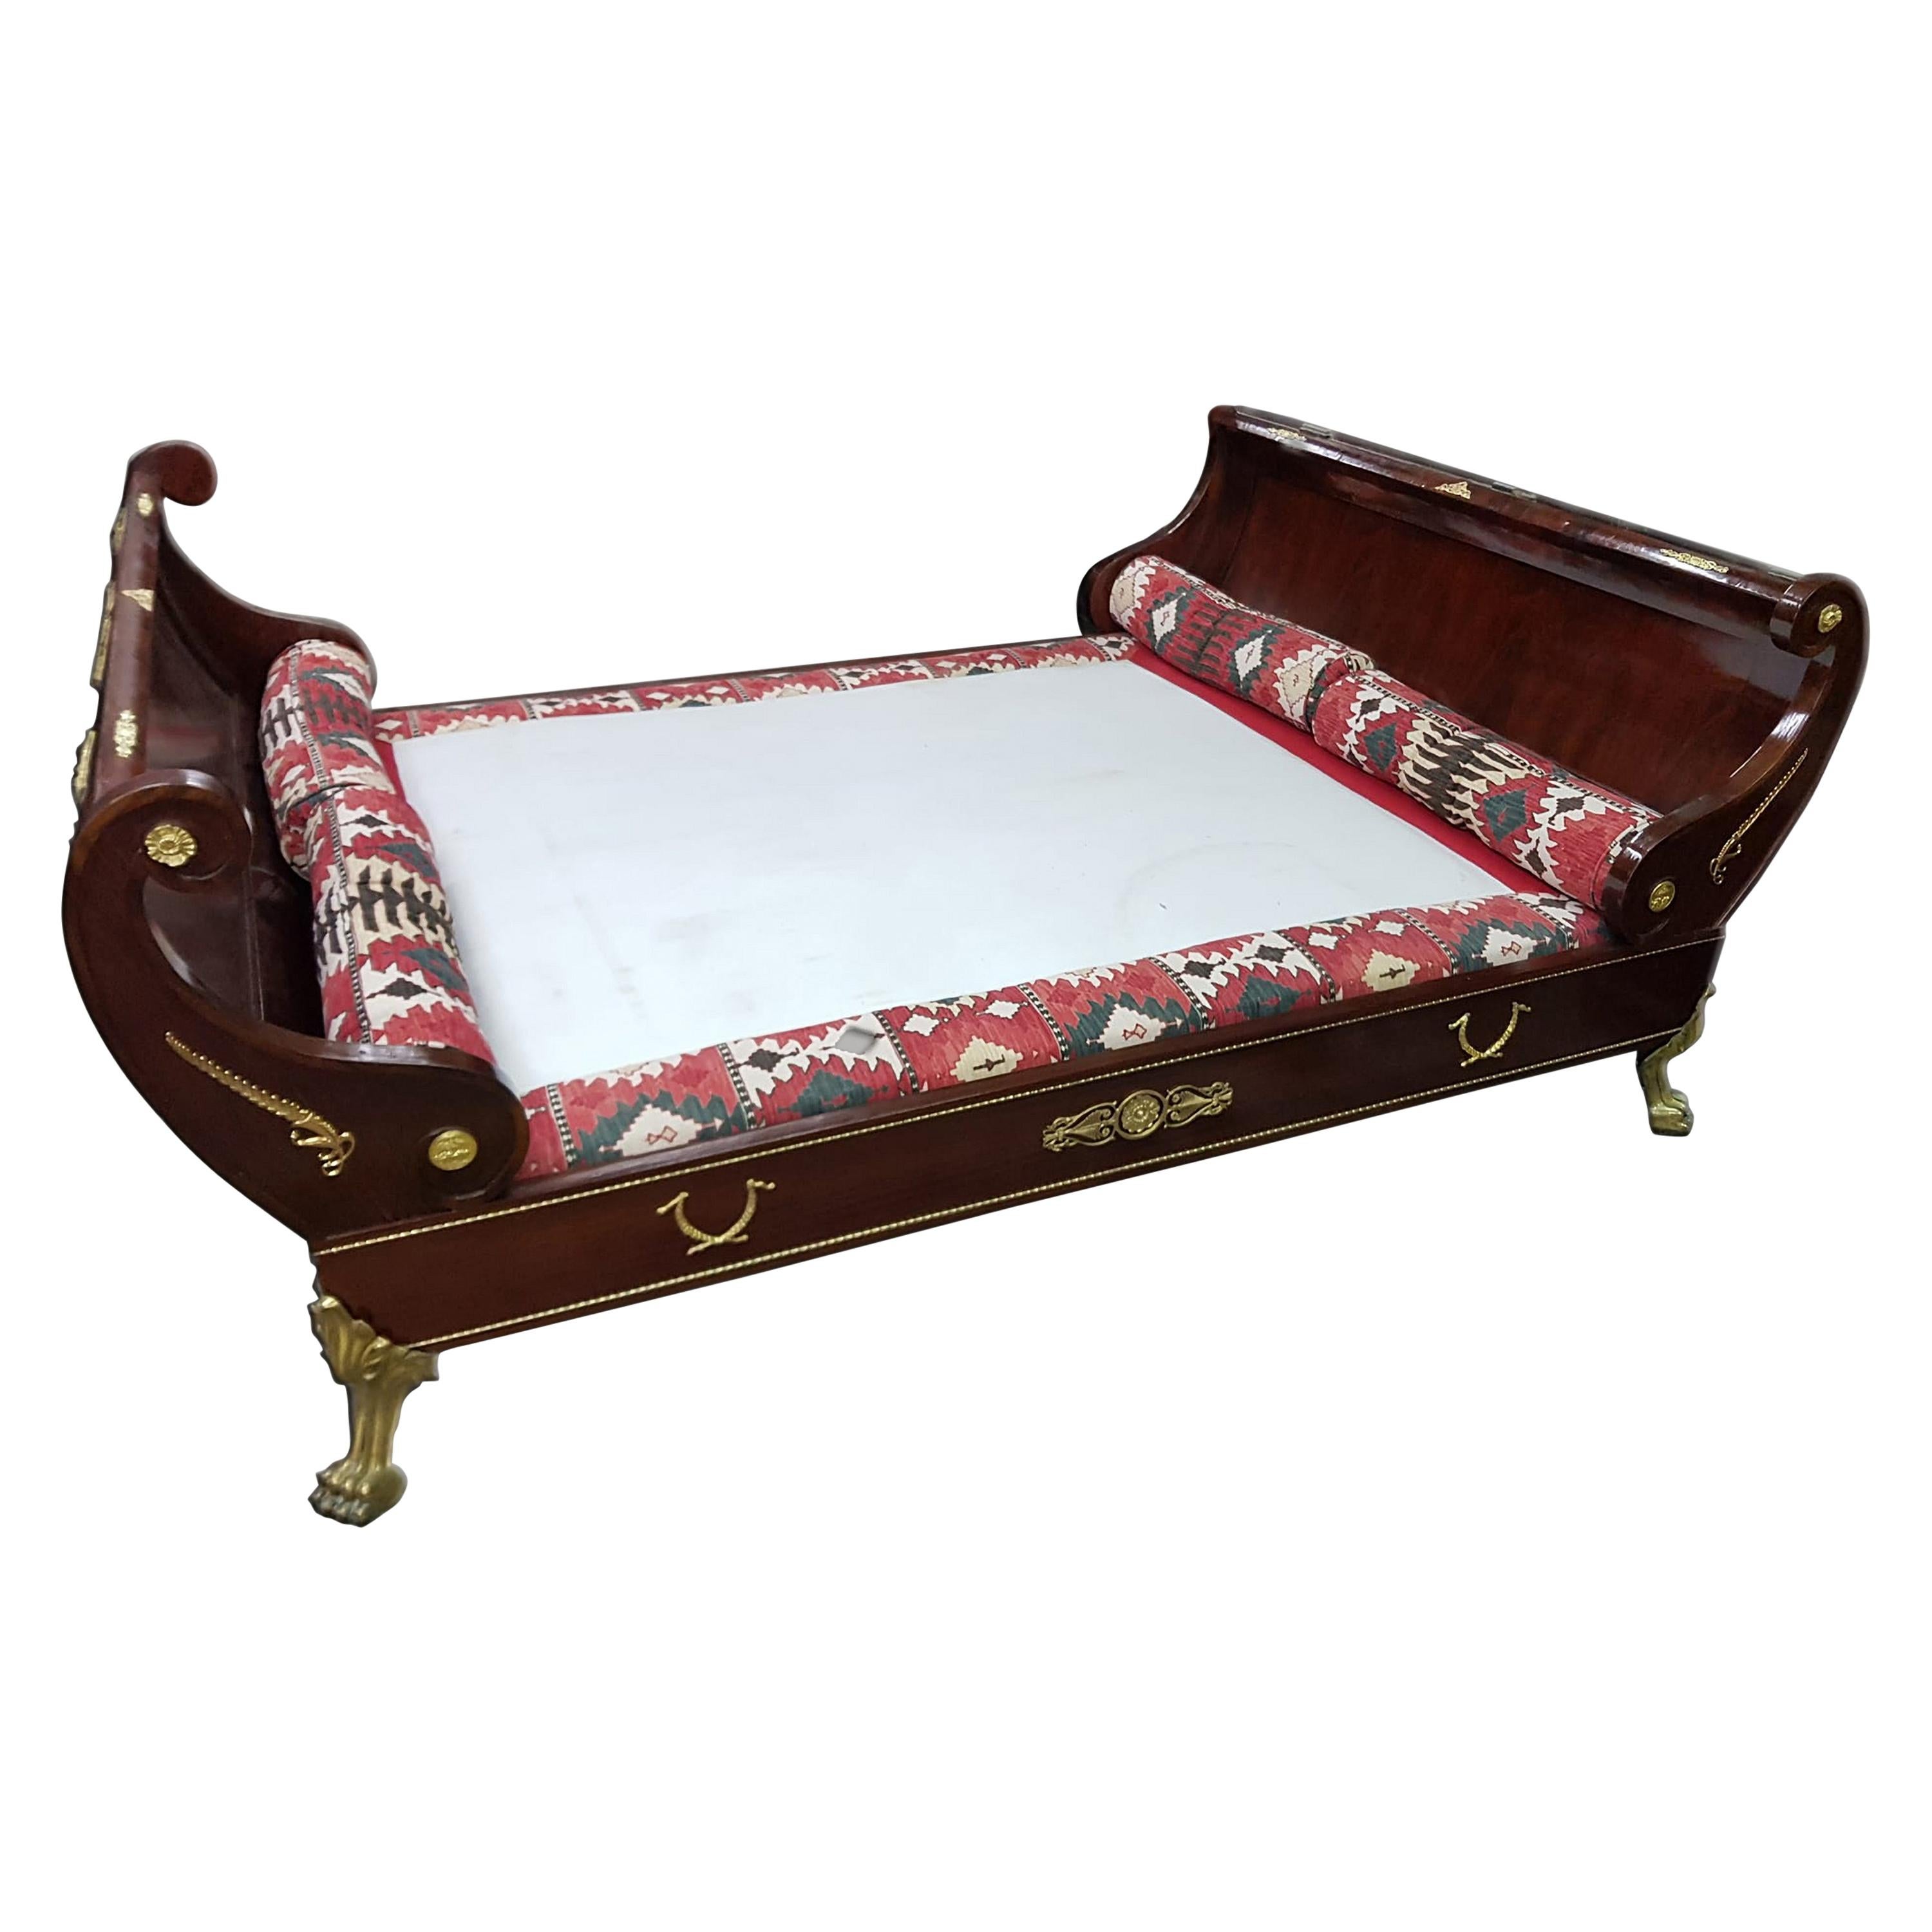 19th Century Elegant Boat Bed, Mahogany Wood, Chiseled and Gilded Bronze For Sale